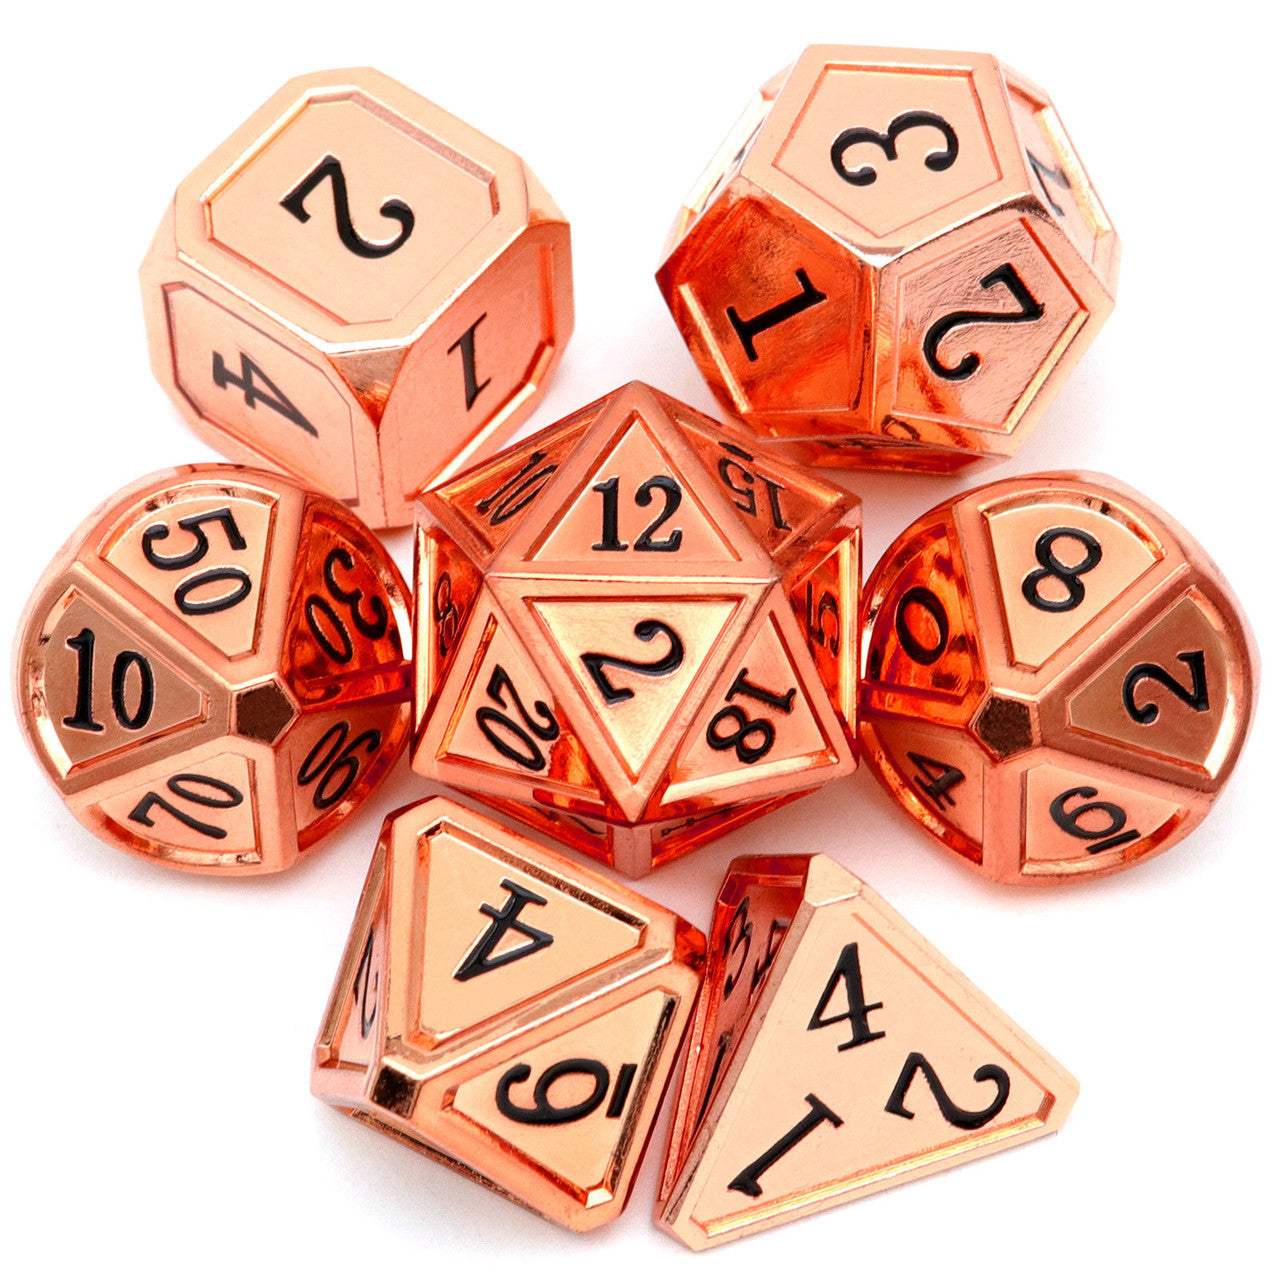 Haxtec Classic Collection Metal DND Dice-Copper/Rosegold Black Numbers